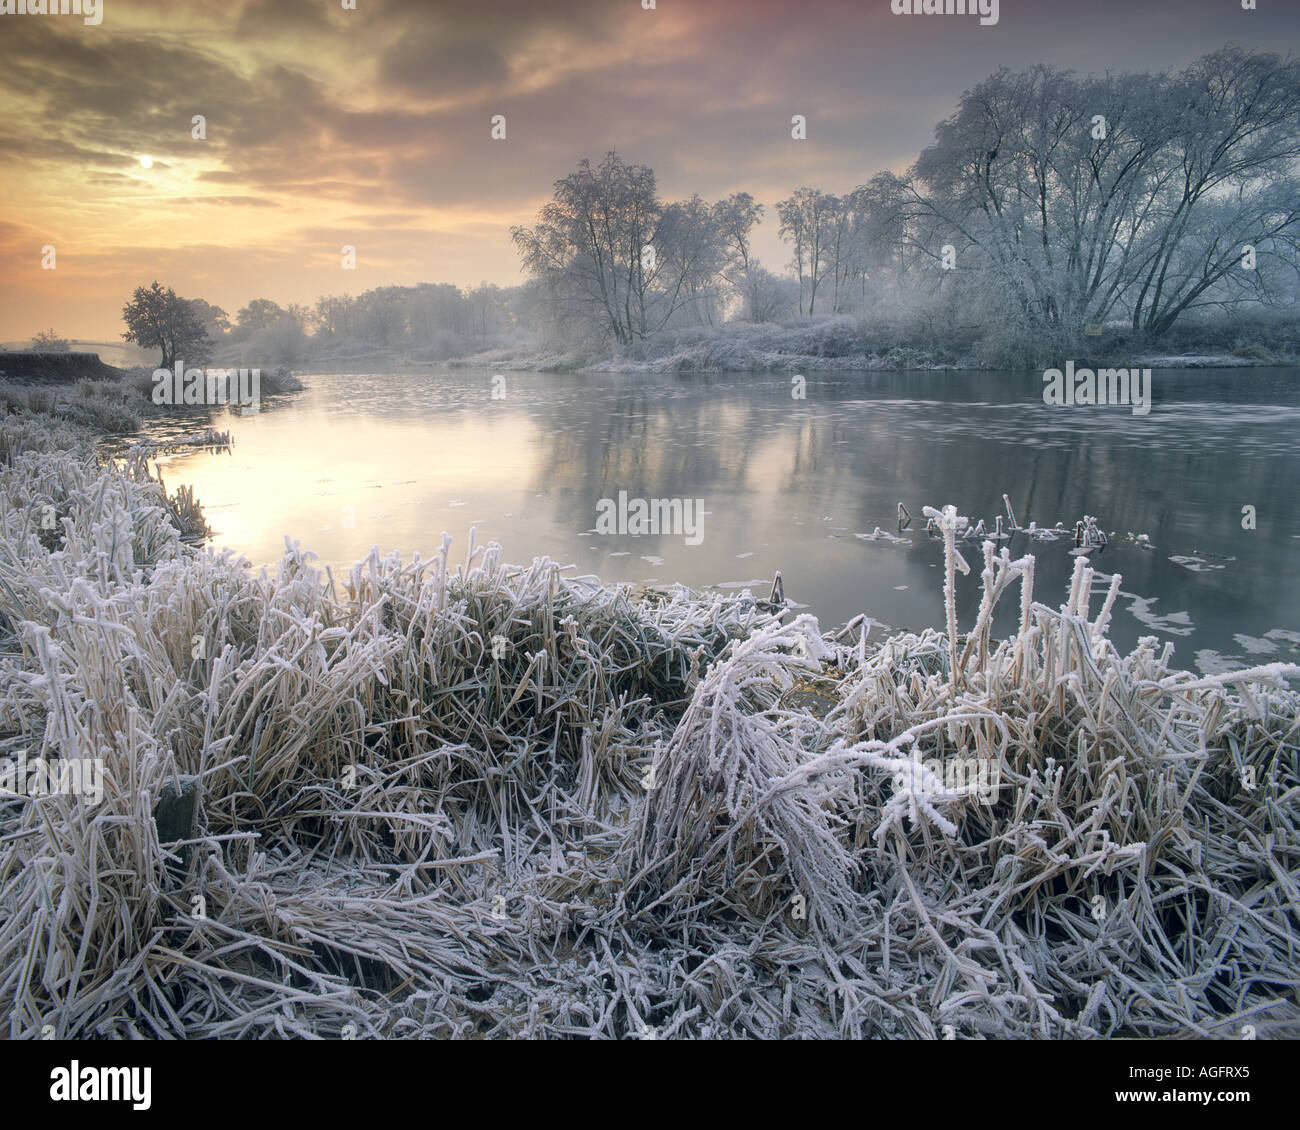 GB - WORCESTERSHIRE:  Wintertime along River Avon Stock Photo